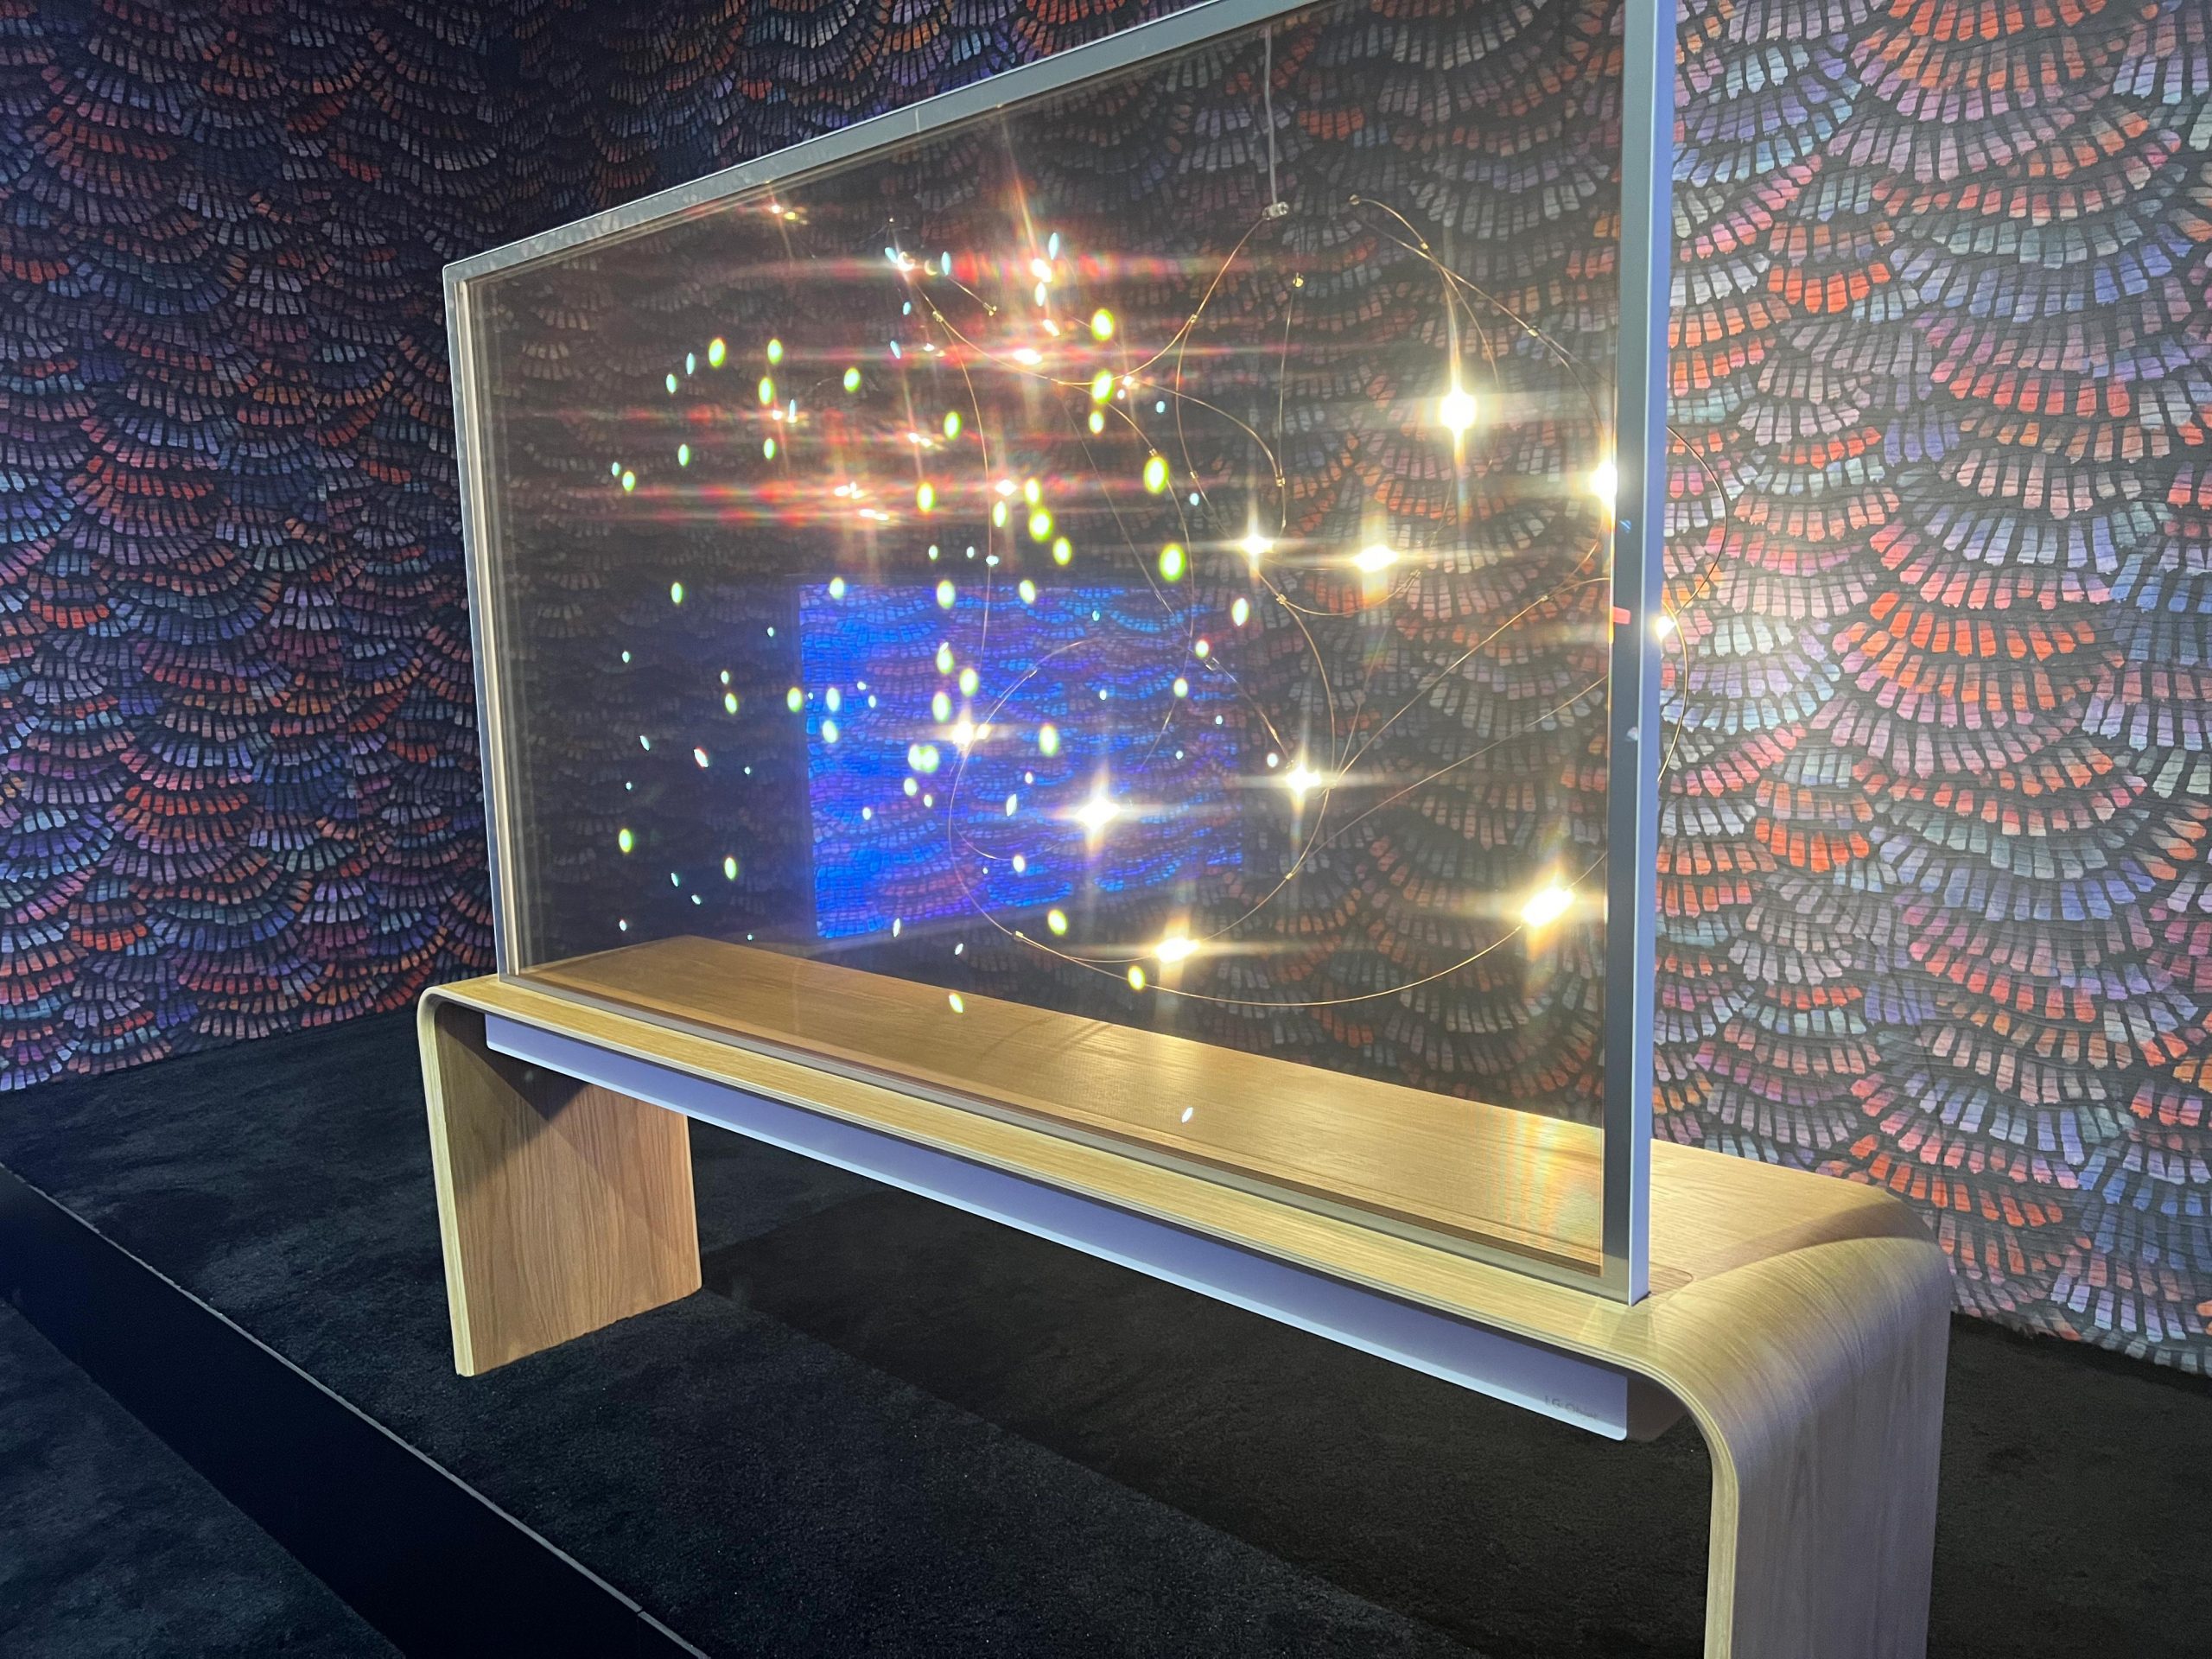 LG OLED T TV on display with patterned wallpaper visible through the transparent screen